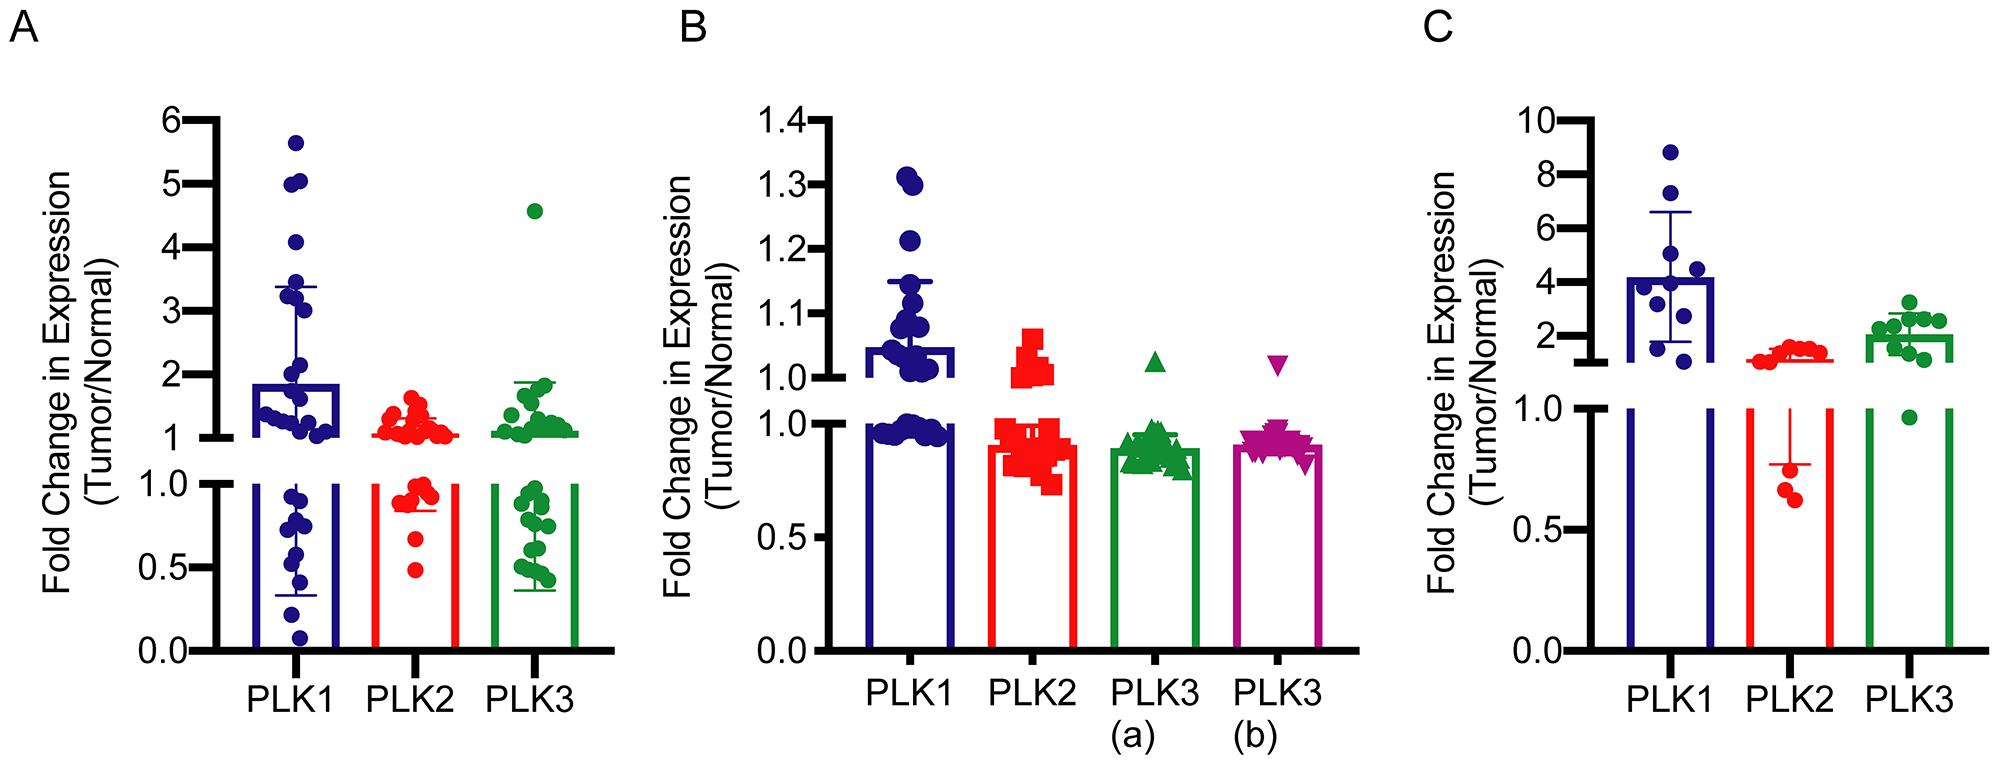 Fold change in mRNA expression of PLK1, PLK2 and PLK3 in hepatoblastoma as compared to normal liver tissue.